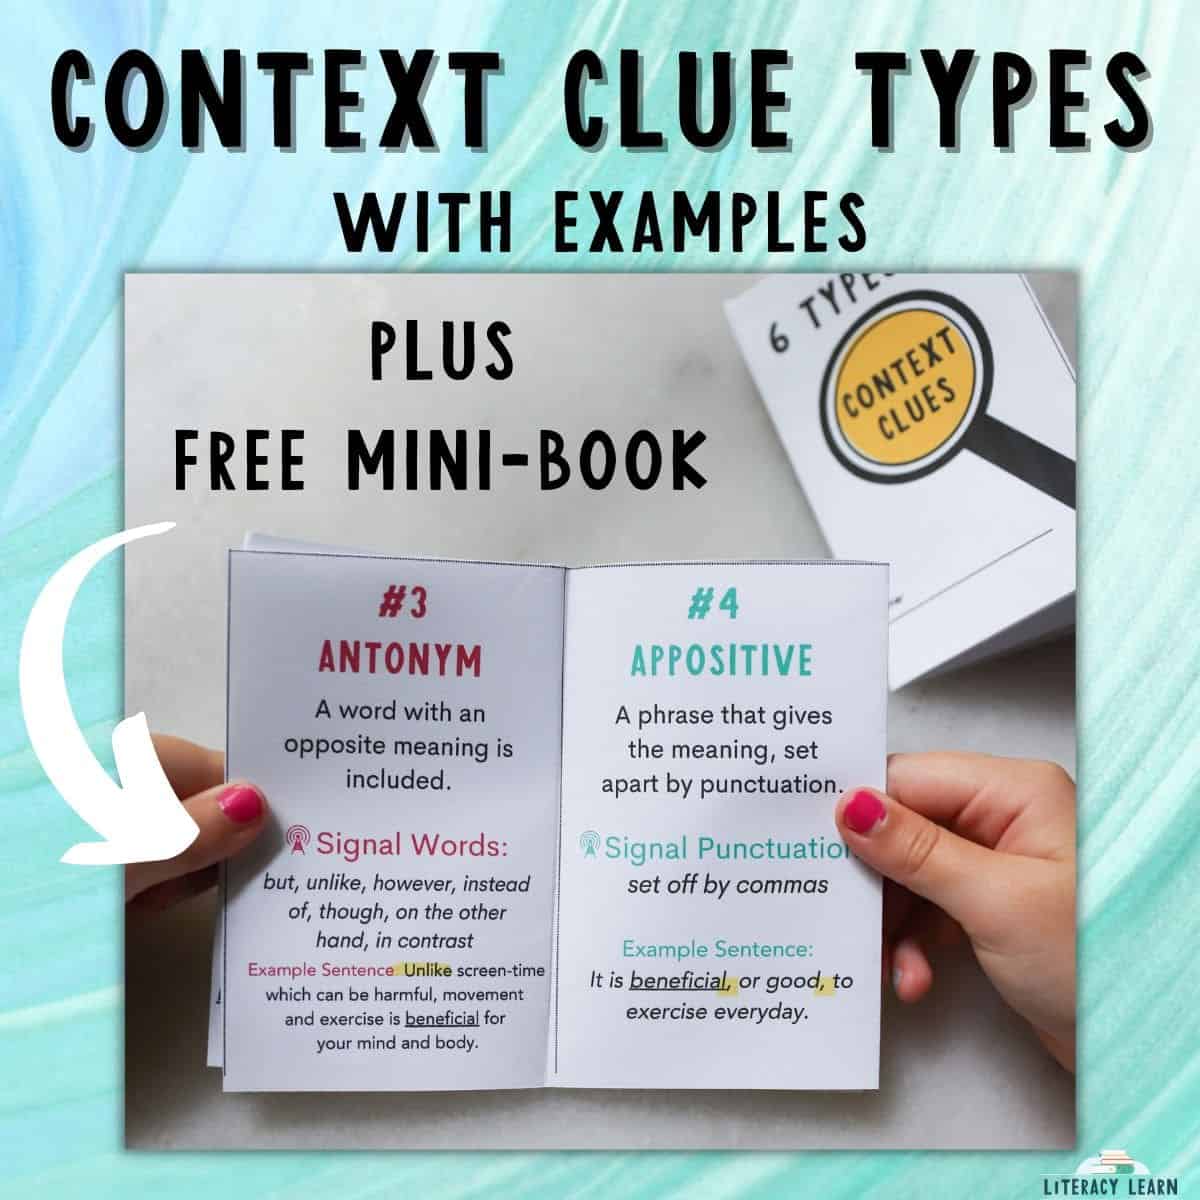 6 Context Clue Types with Examples FREE Mini Book Literacy Learn